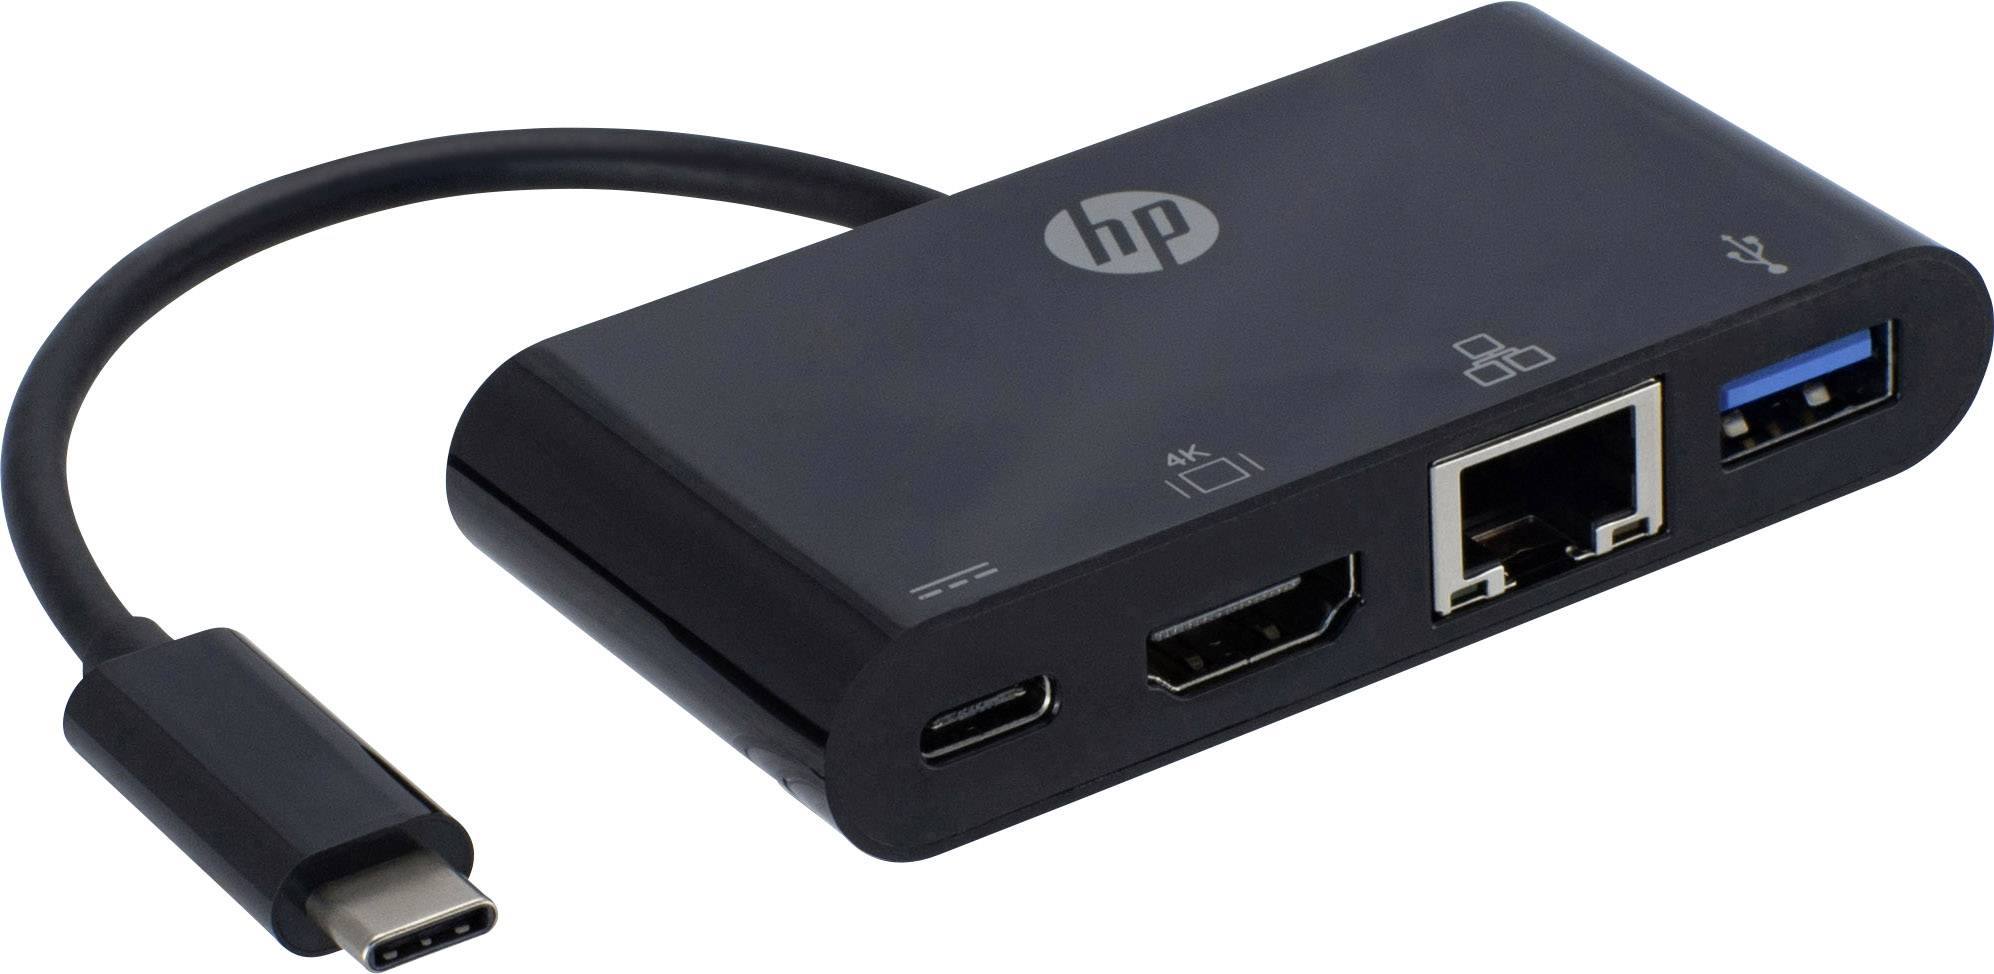 connect hp laptop to hdmi projector